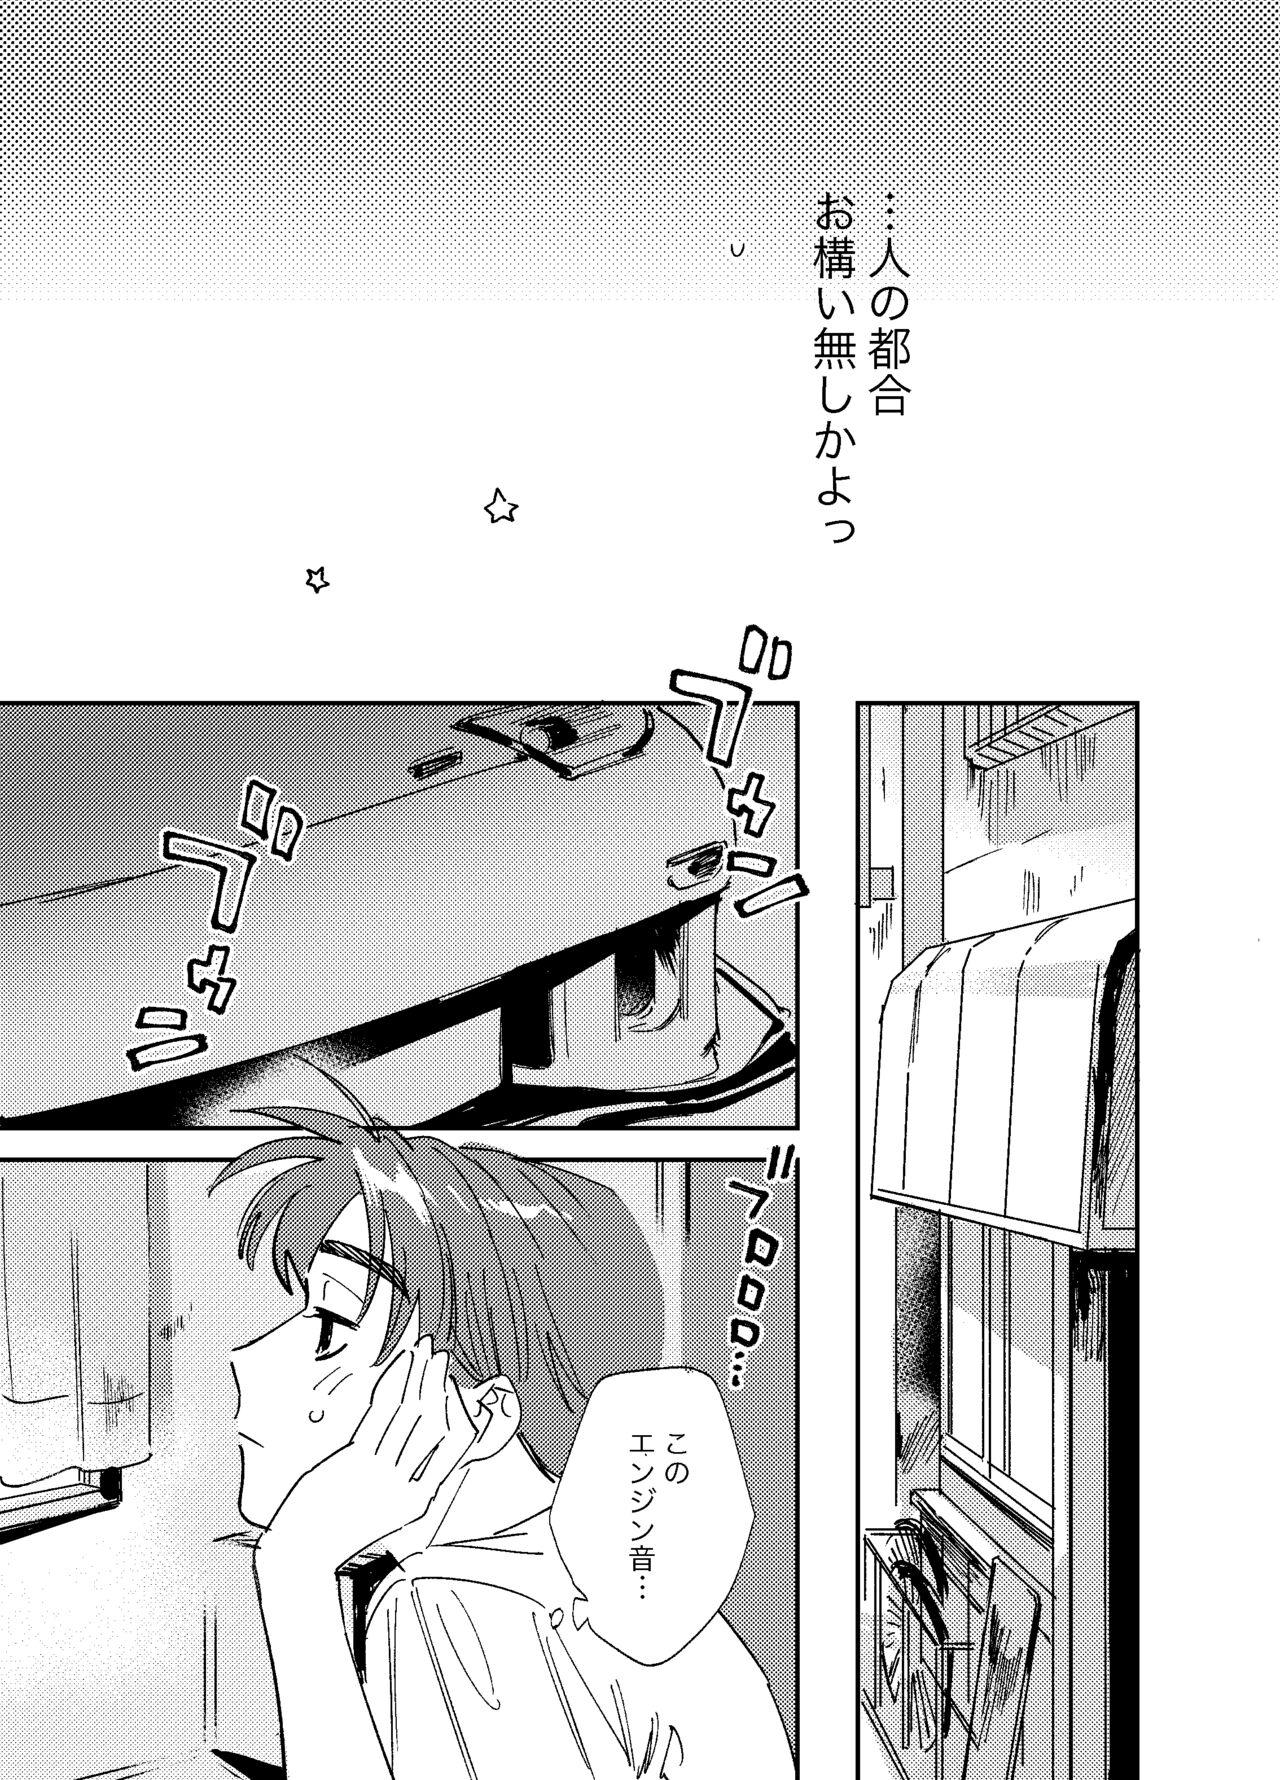 Pov Blow Job more than stars, more than you. - Initial d Infiel - Page 6